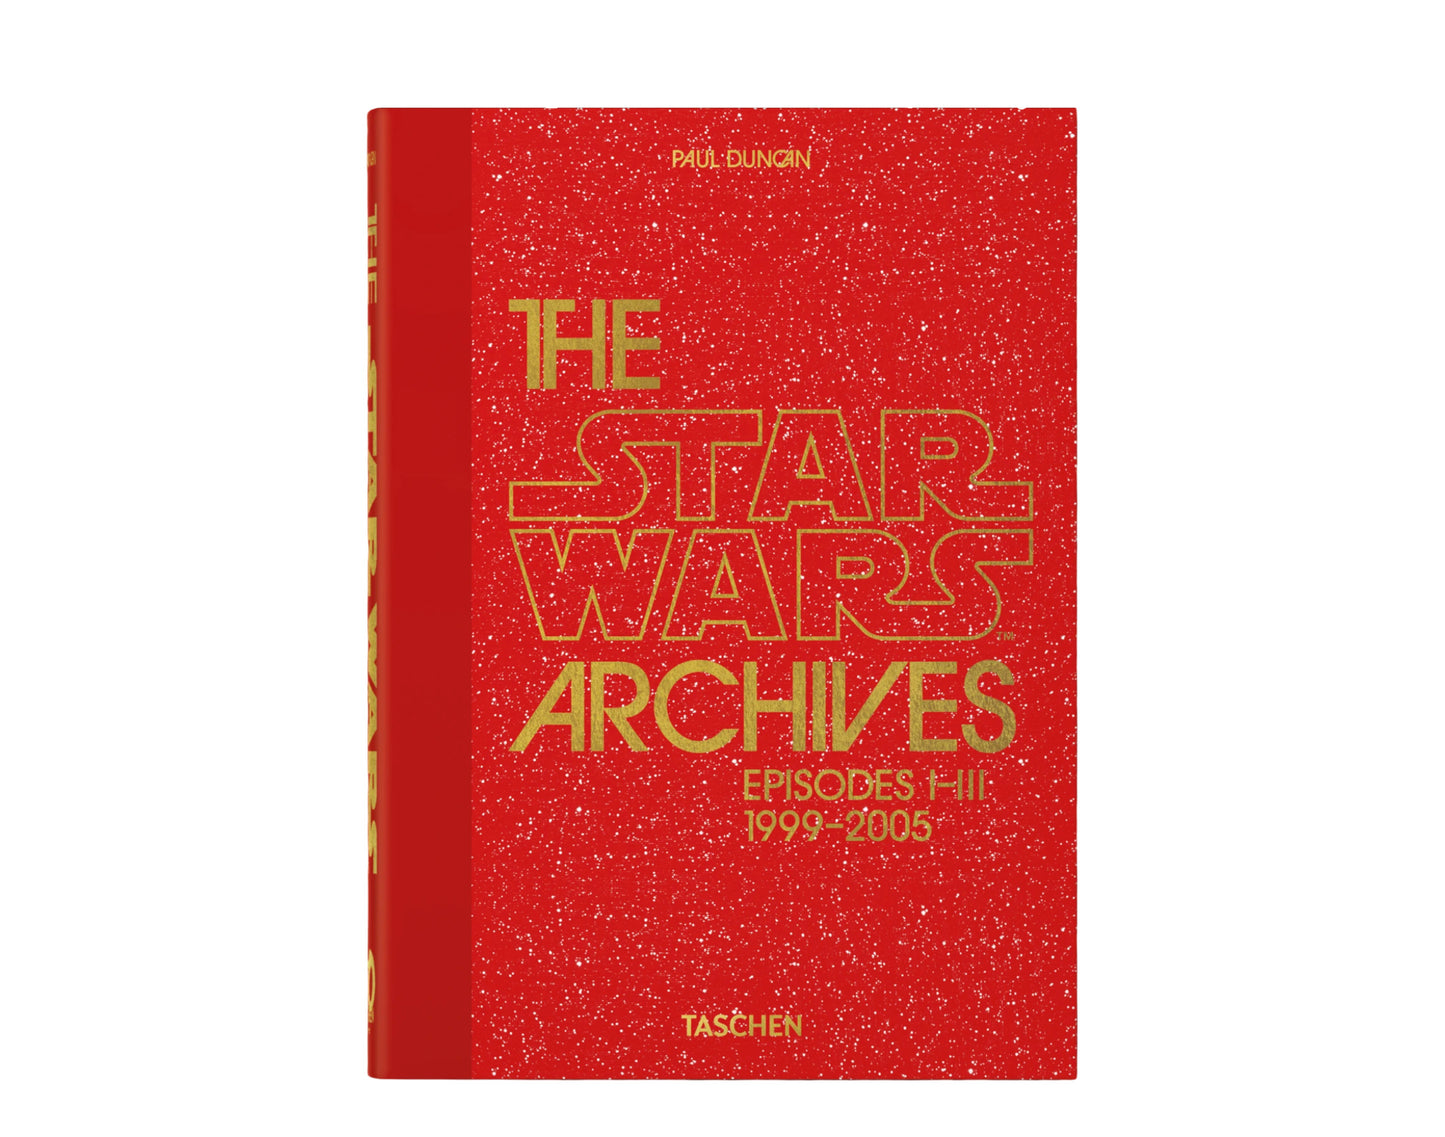 Taschen Books - The Star Wars Archives. 1999–2005. 40th Anniversary Edition Hardcover Book